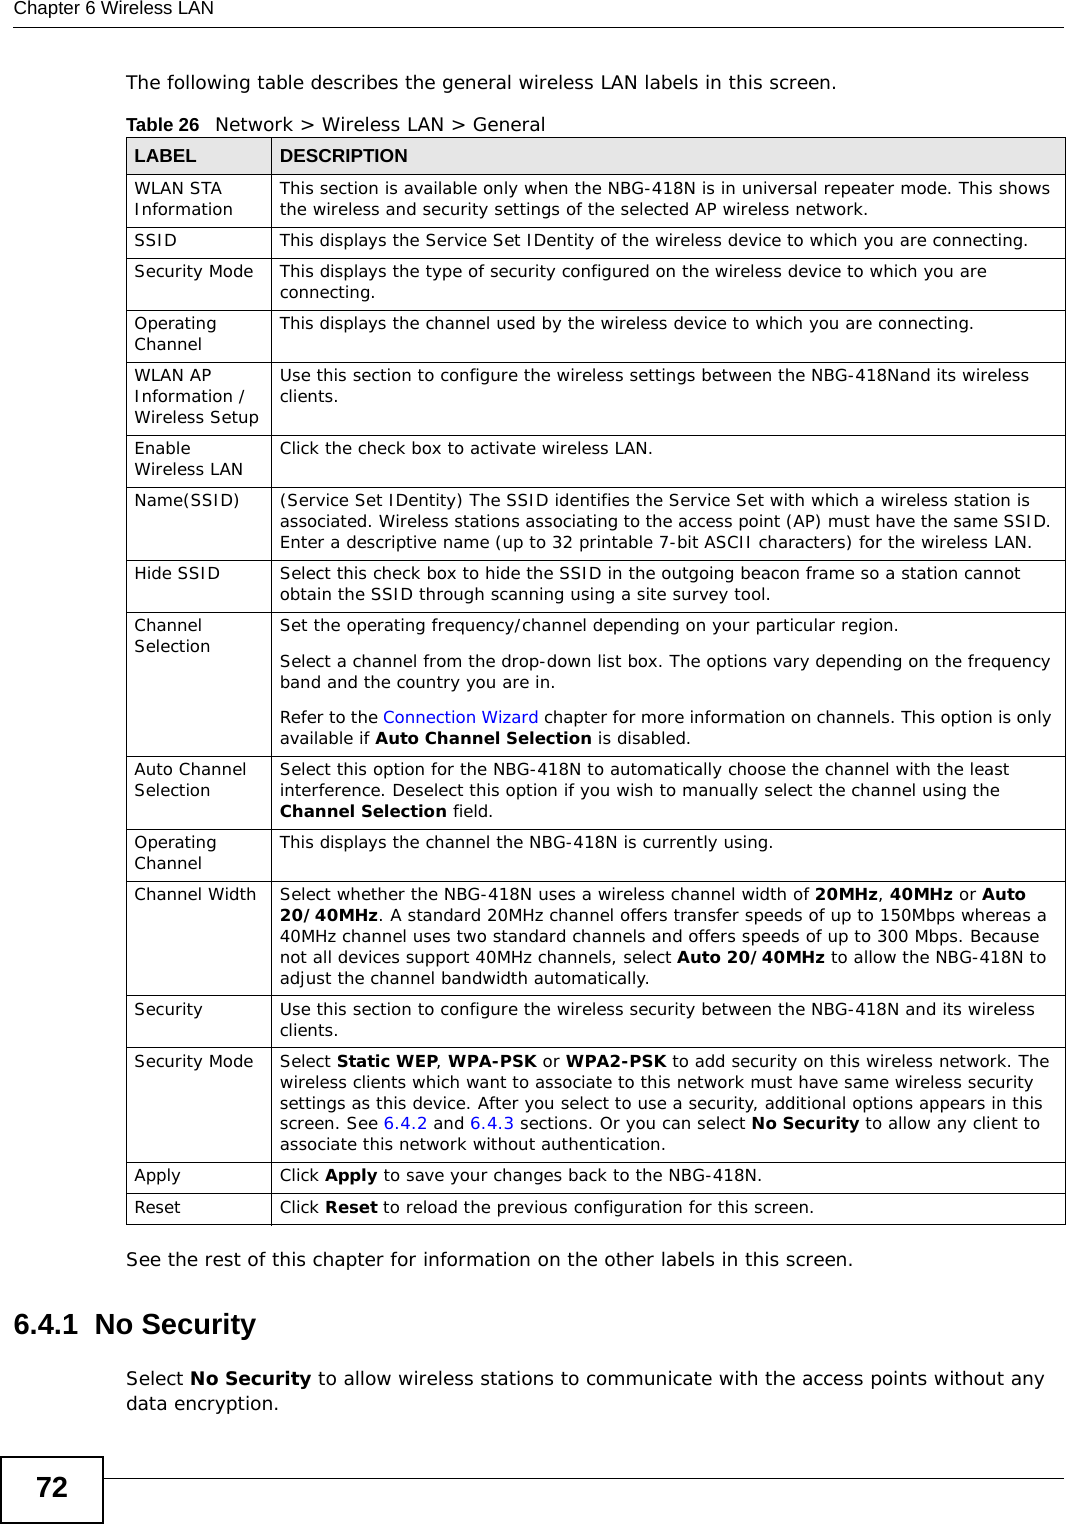 Chapter 6 Wireless LAN72The following table describes the general wireless LAN labels in this screen.See the rest of this chapter for information on the other labels in this screen. 6.4.1  No SecuritySelect No Security to allow wireless stations to communicate with the access points without any data encryption. Table 26   Network &gt; Wireless LAN &gt; GeneralLABEL DESCRIPTIONWLAN STA Information This section is available only when the NBG-418N is in universal repeater mode. This shows the wireless and security settings of the selected AP wireless network.SSID This displays the Service Set IDentity of the wireless device to which you are connecting.Security Mode This displays the type of security configured on the wireless device to which you are connecting.Operating Channel  This displays the channel used by the wireless device to which you are connecting.WLAN AP Information / Wireless SetupUse this section to configure the wireless settings between the NBG-418Nand its wireless clients.Enable Wireless LAN Click the check box to activate wireless LAN.Name(SSID) (Service Set IDentity) The SSID identifies the Service Set with which a wireless station is associated. Wireless stations associating to the access point (AP) must have the same SSID. Enter a descriptive name (up to 32 printable 7-bit ASCII characters) for the wireless LAN. Hide SSID Select this check box to hide the SSID in the outgoing beacon frame so a station cannot obtain the SSID through scanning using a site survey tool.Channel Selection Set the operating frequency/channel depending on your particular region. Select a channel from the drop-down list box. The options vary depending on the frequency band and the country you are in.Refer to the Connection Wizard chapter for more information on channels. This option is only available if Auto Channel Selection is disabled.Auto Channel Selection Select this option for the NBG-418N to automatically choose the channel with the least interference. Deselect this option if you wish to manually select the channel using the Channel Selection field.Operating Channel  This displays the channel the NBG-418N is currently using.Channel Width Select whether the NBG-418N uses a wireless channel width of 20MHz, 40MHz or Auto 20/40MHz. A standard 20MHz channel offers transfer speeds of up to 150Mbps whereas a 40MHz channel uses two standard channels and offers speeds of up to 300 Mbps. Because not all devices support 40MHz channels, select Auto 20/40MHz to allow the NBG-418N to adjust the channel bandwidth automatically.Security Use this section to configure the wireless security between the NBG-418N and its wireless clients.Security Mode Select Static WEP, WPA-PSK or WPA2-PSK to add security on this wireless network. The wireless clients which want to associate to this network must have same wireless security settings as this device. After you select to use a security, additional options appears in this screen. See 6.4.2 and 6.4.3 sections. Or you can select No Security to allow any client to associate this network without authentication.Apply Click Apply to save your changes back to the NBG-418N.Reset Click Reset to reload the previous configuration for this screen.